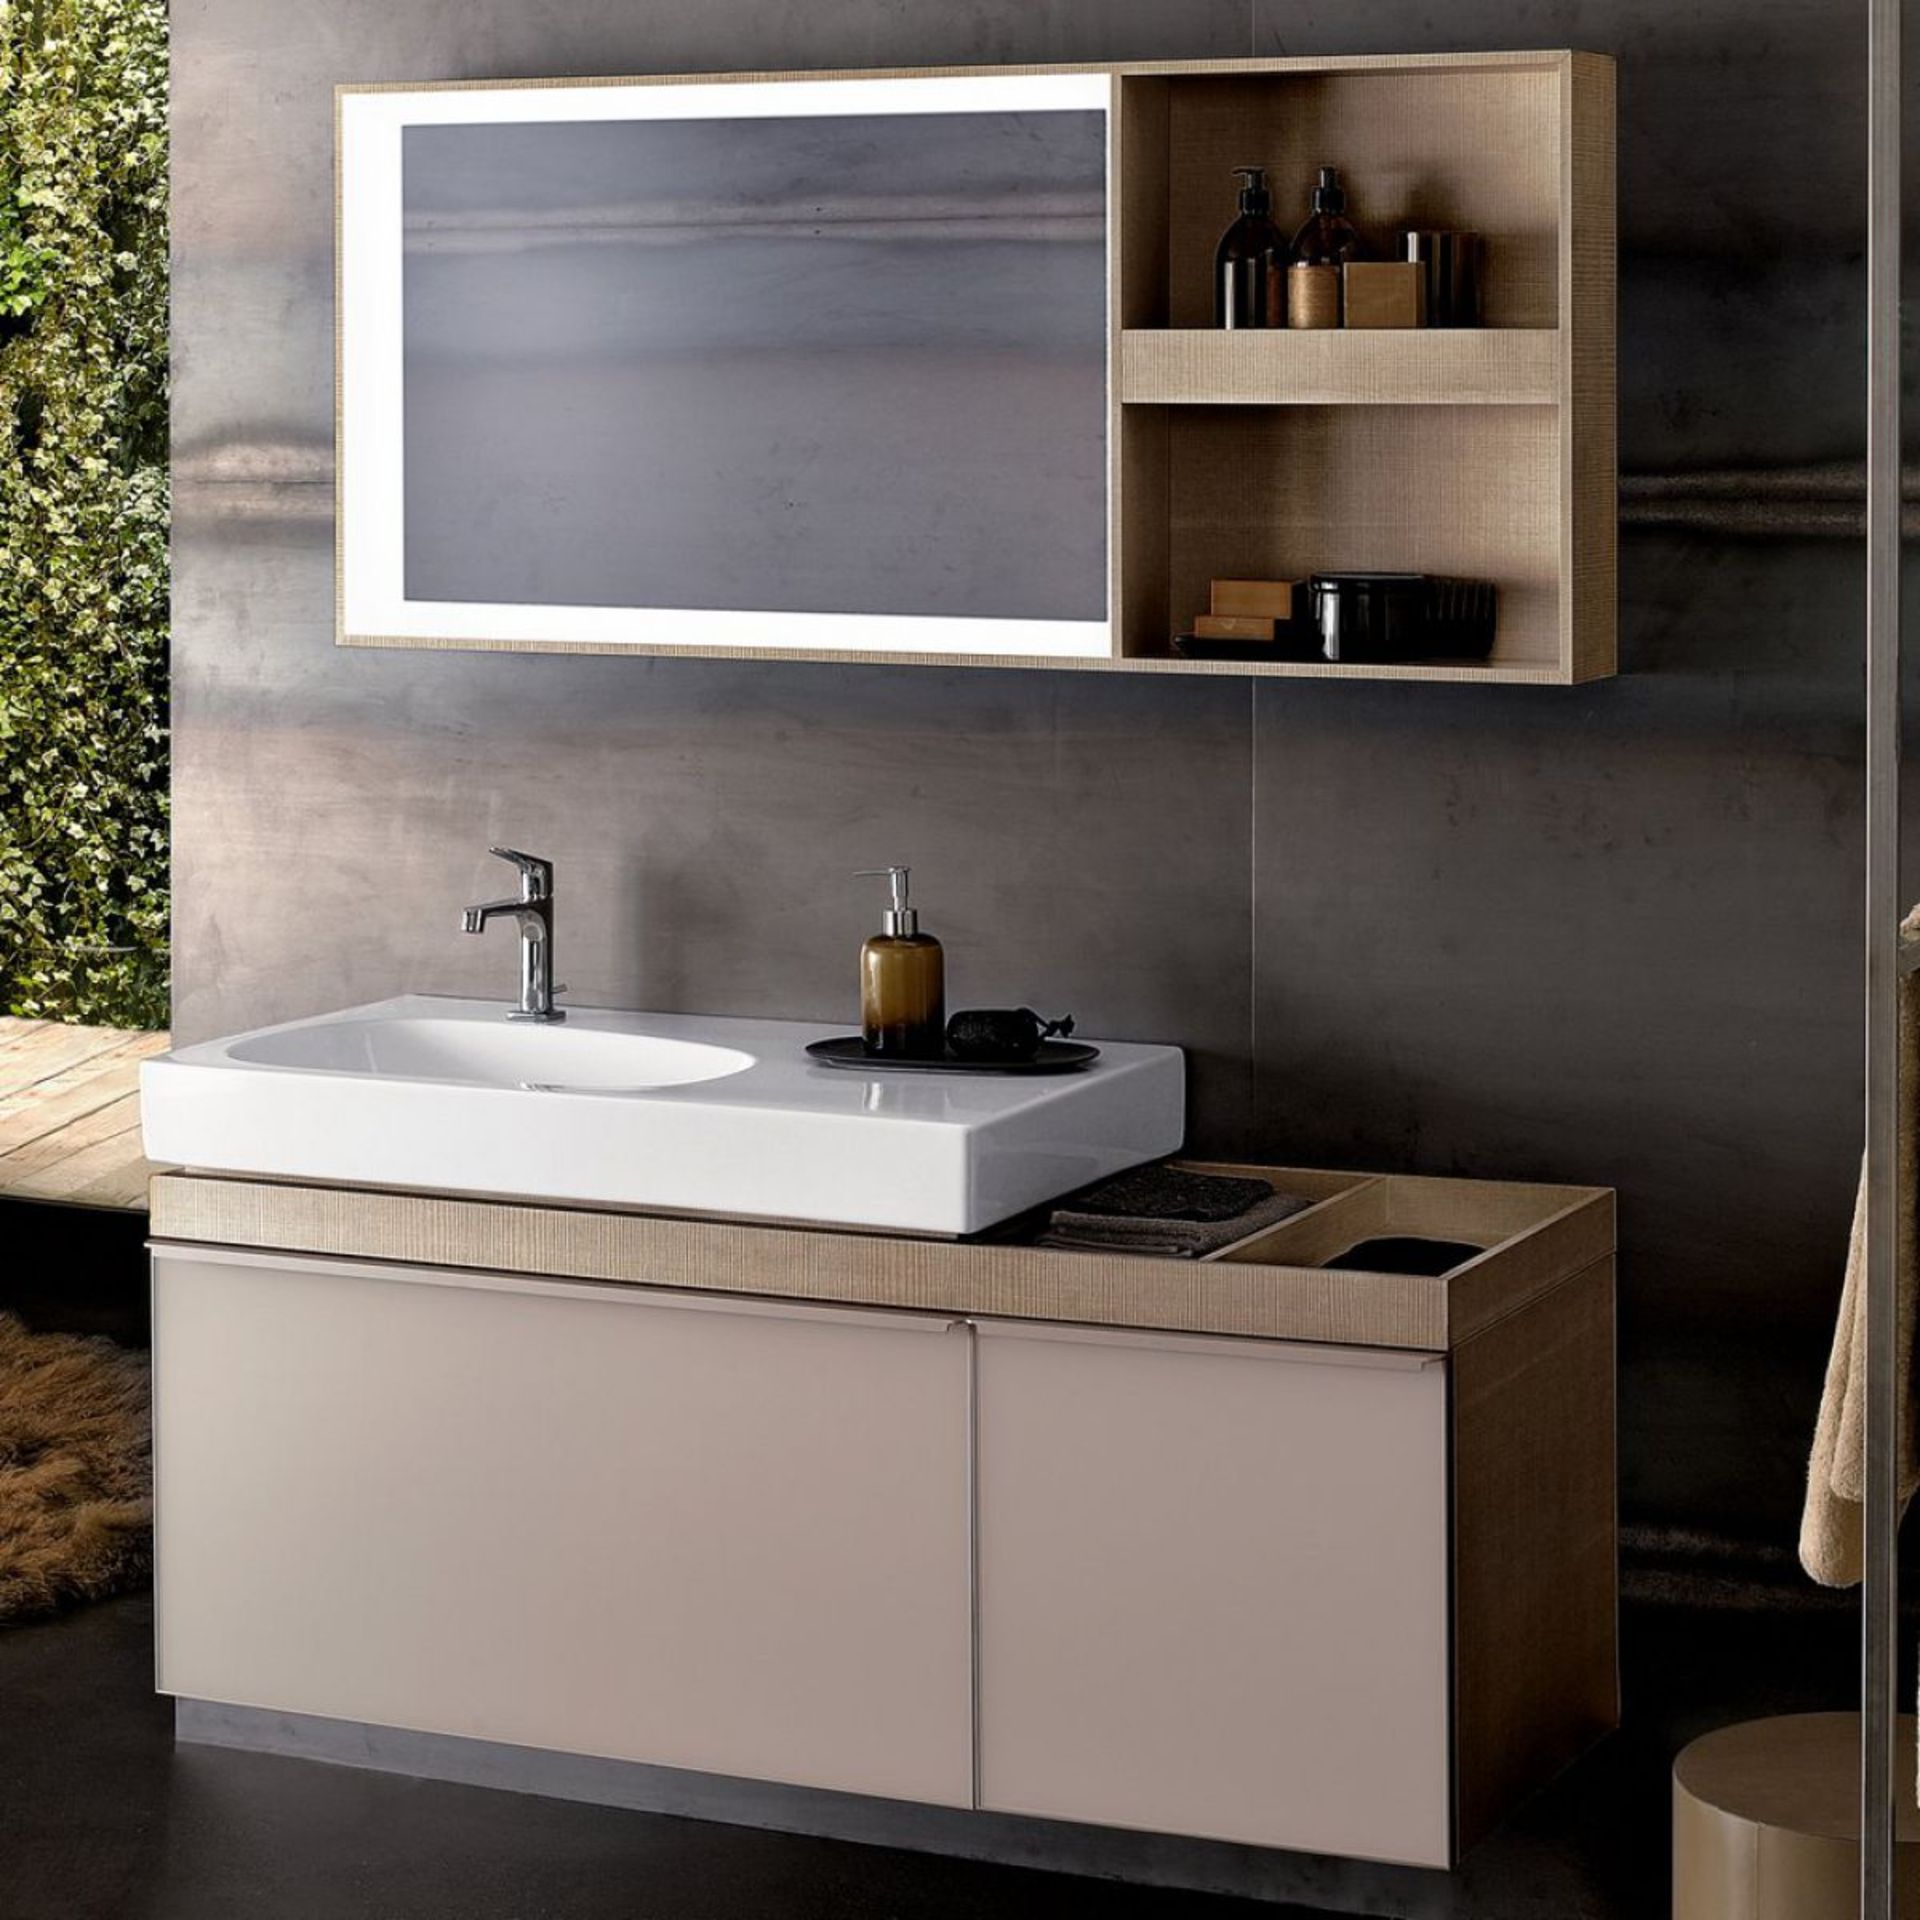 (XL9) 1200mm Geberit Citterio Vanity Unit With Drawer And RH Shelf 120cm. RRP £1,569.99. Comes...